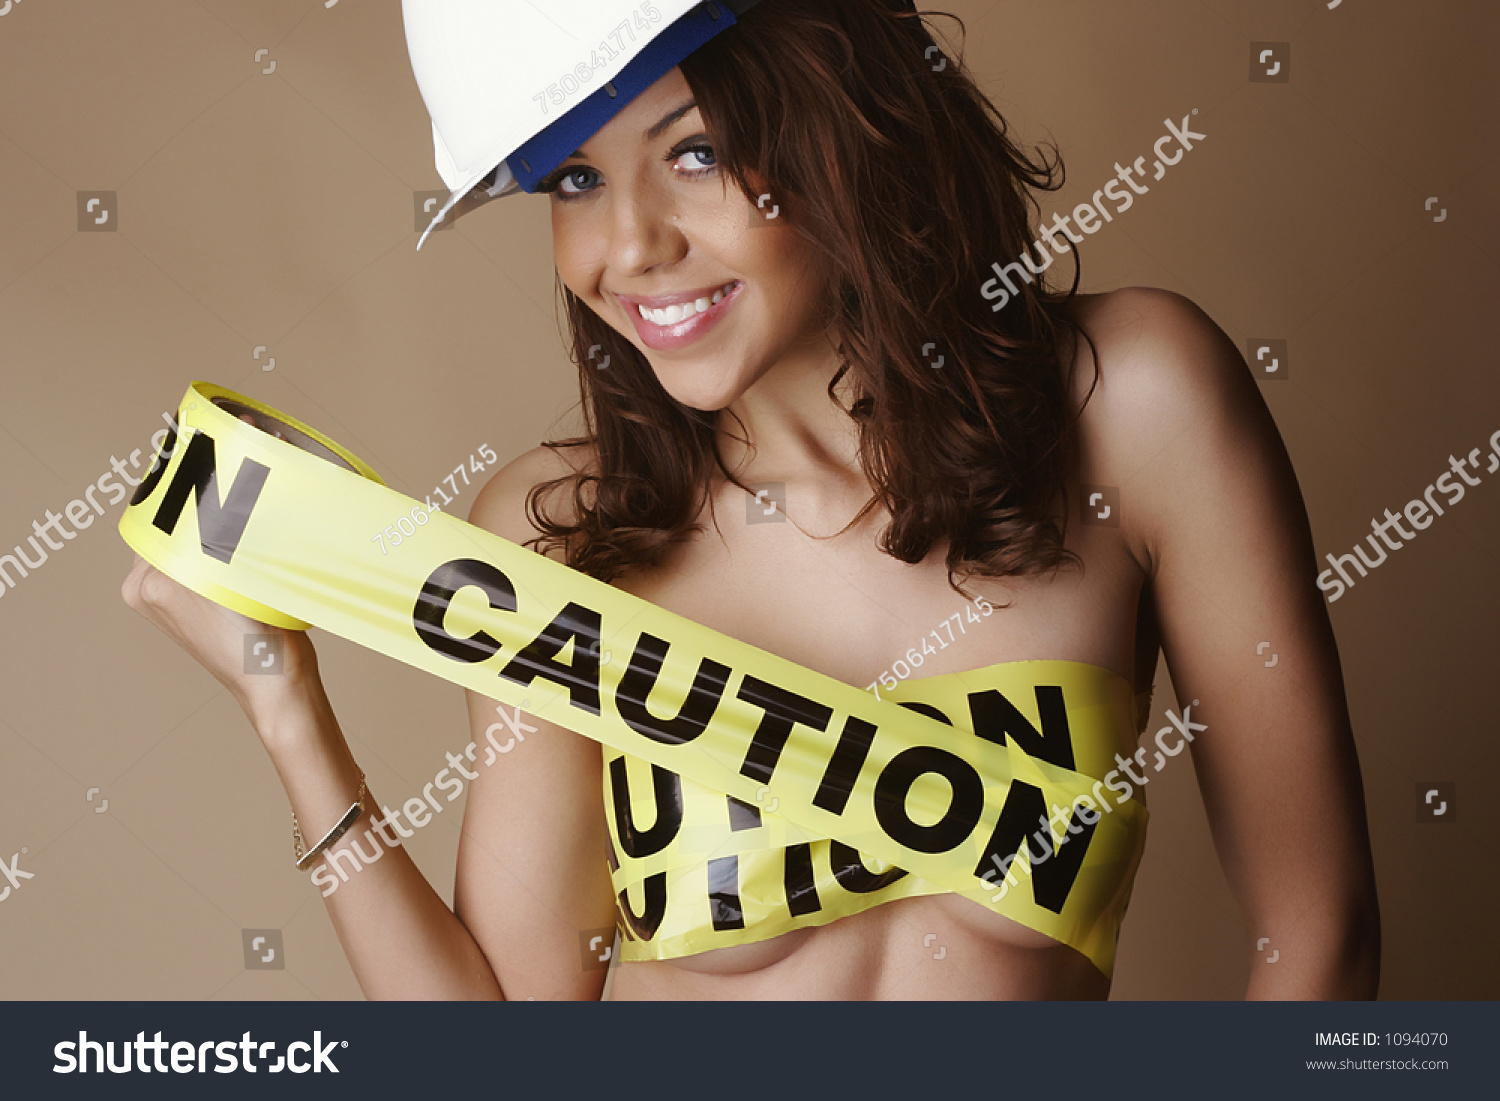 stock-photo-nude-female-smiling-wearing-a-construction-hard-hat-and-with-breasts-covered-by-yellow-caution-1094070.jpg